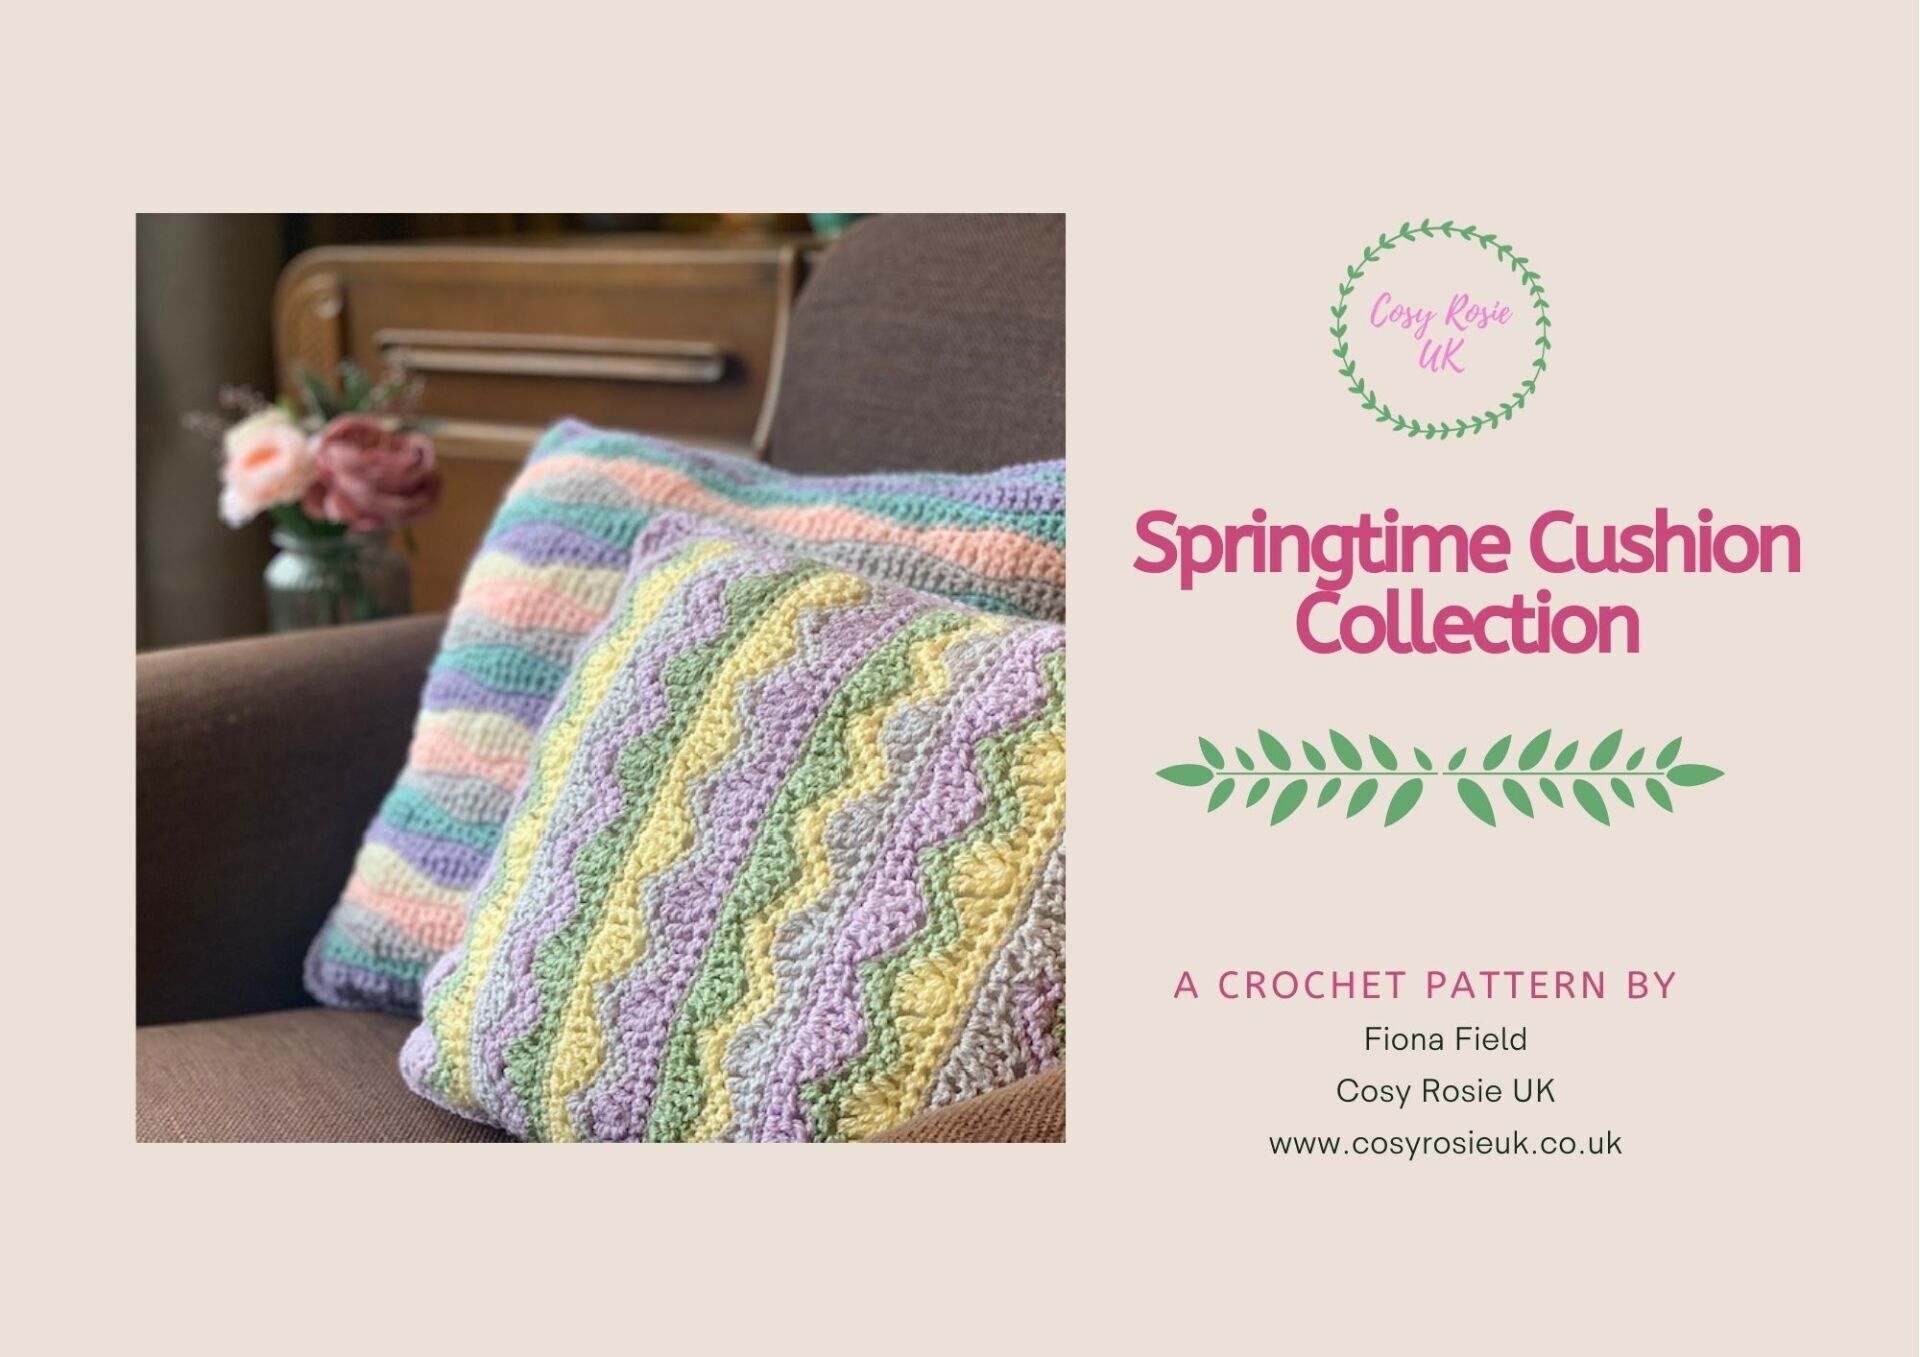 Easy Crochet patterns for cushion covers